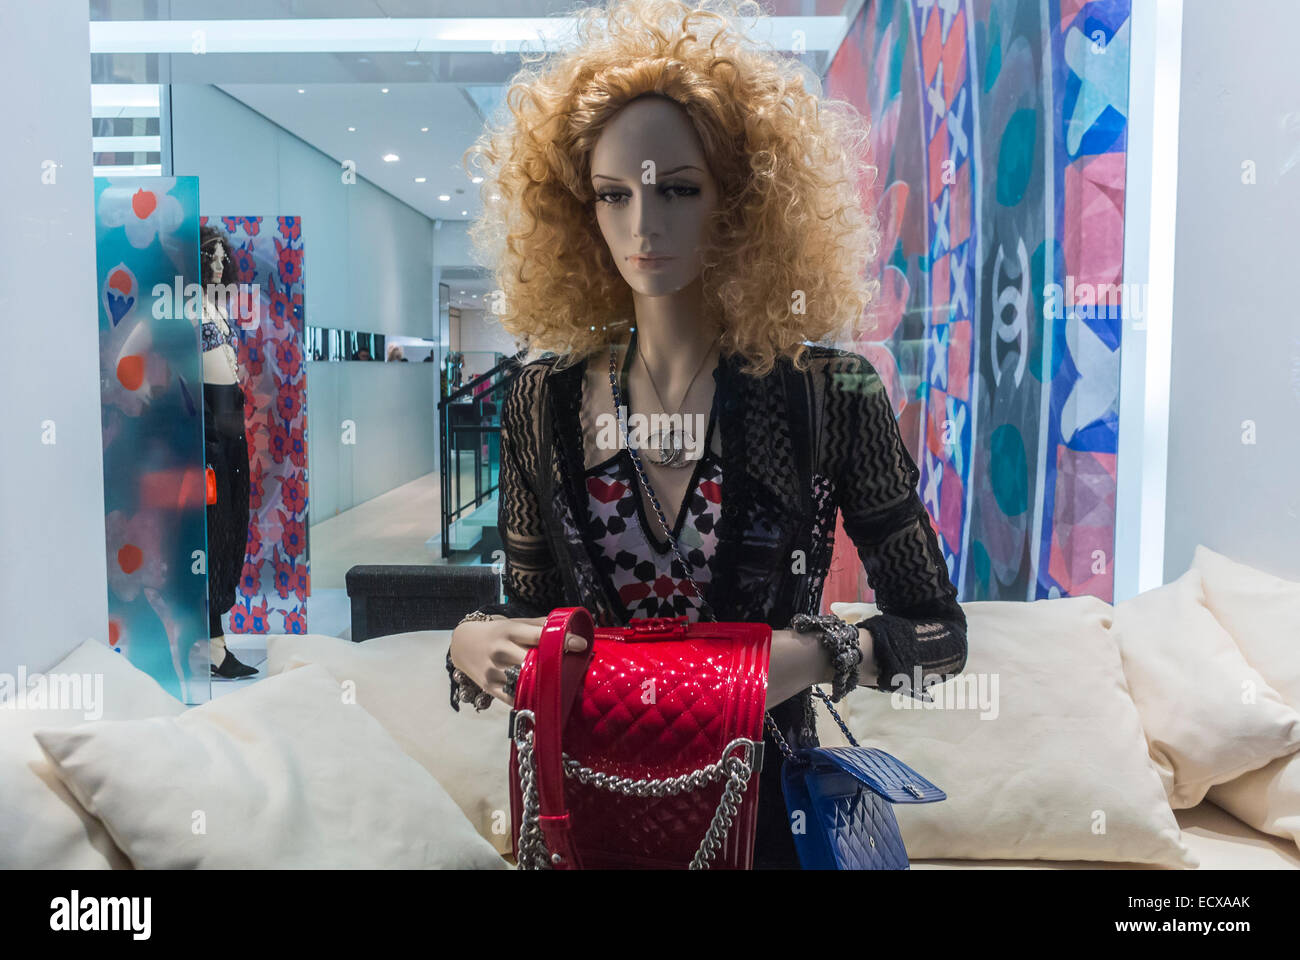 Paris, France, Chanel Store Window Display, Mannequin, Shopping, Night,  Luxury Fashion Brands Shops, haute couture interior, mode labels, haute  couture accessories Stock Photo - Alamy